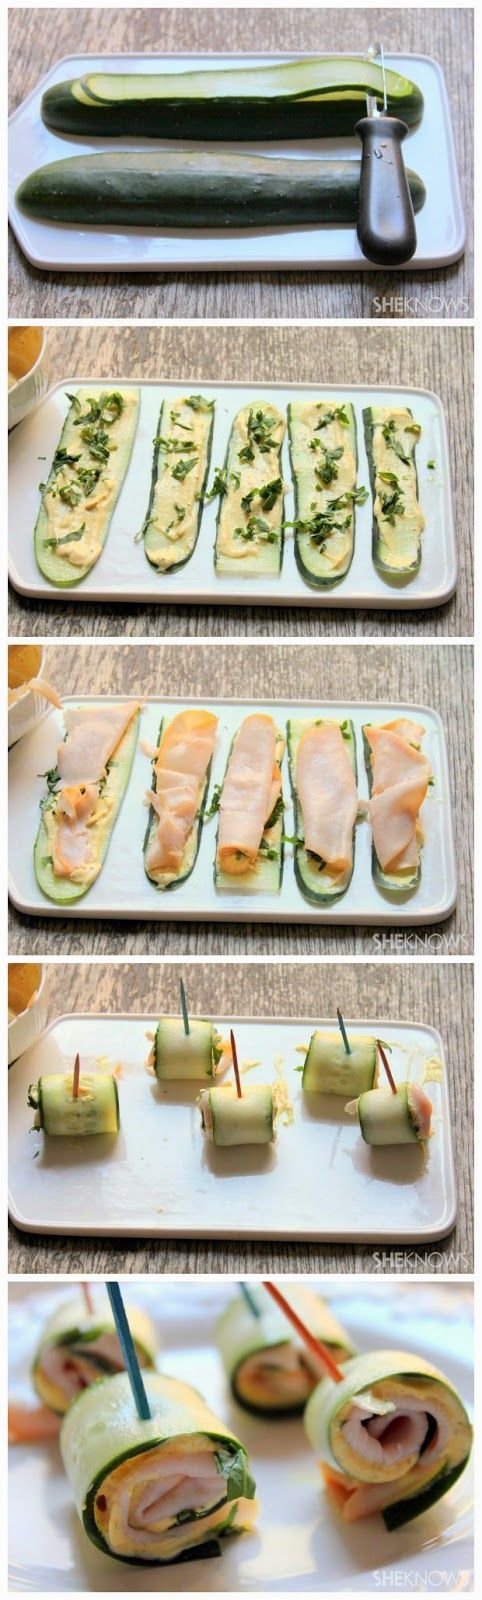 Cucumber Roll Ups with Hummus and Turkey